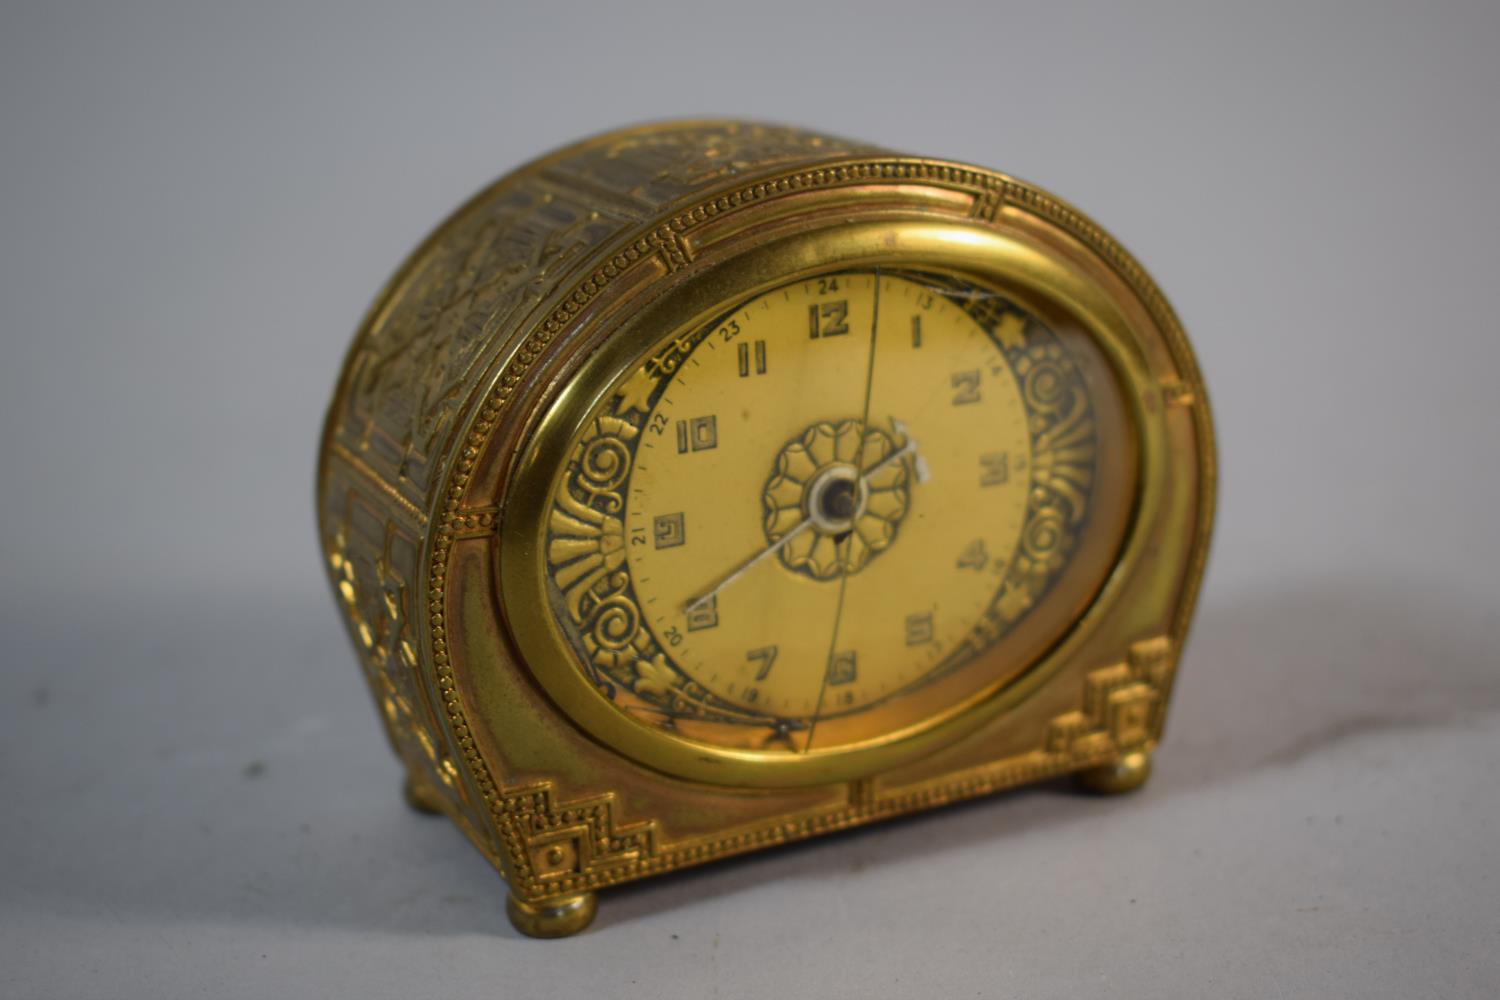 A Mid 20th Century Brass Alarm Clock with Body Decorated in Relief, Fingers Loose, Cracked Glass and - Image 2 of 3